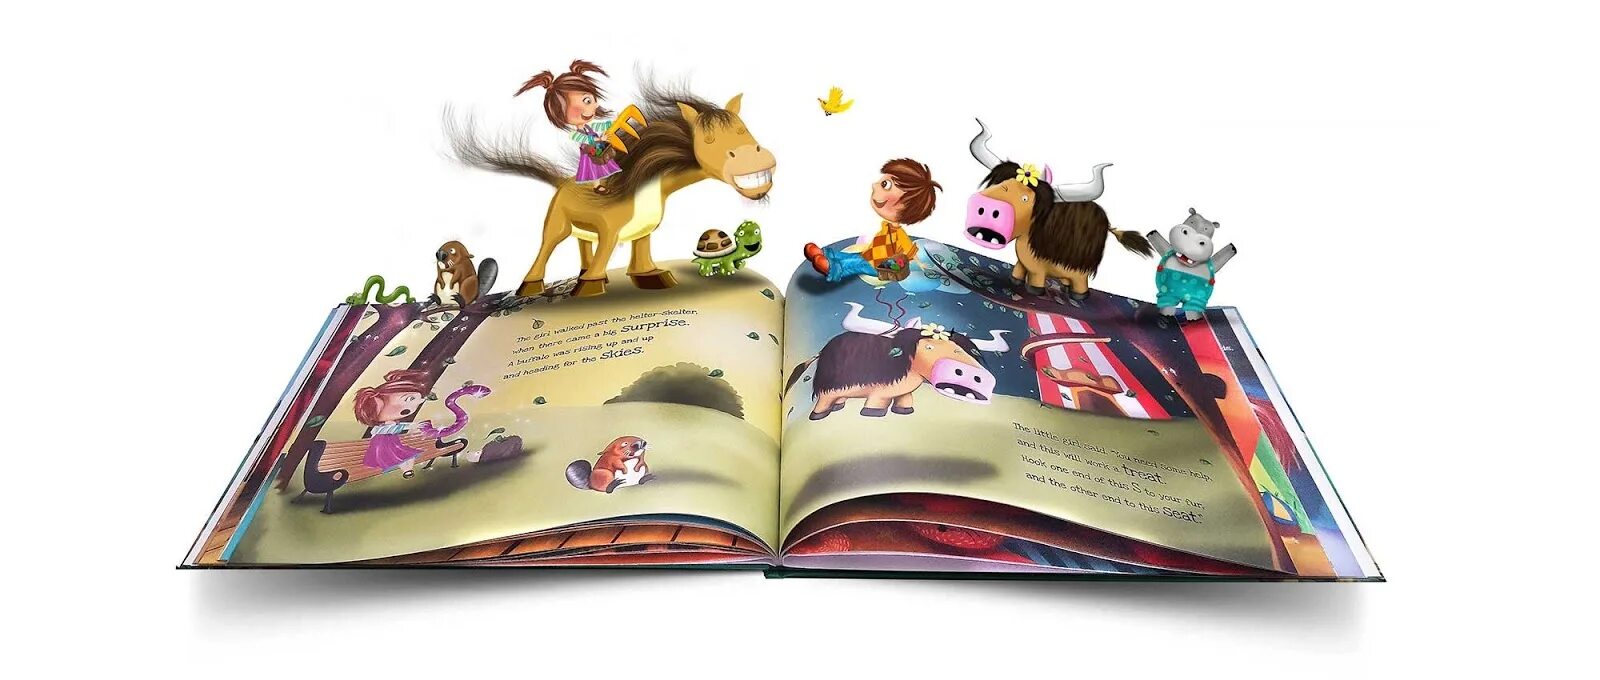 My story book. Story book. The create книжка. Create a story book. Picture story books детские.